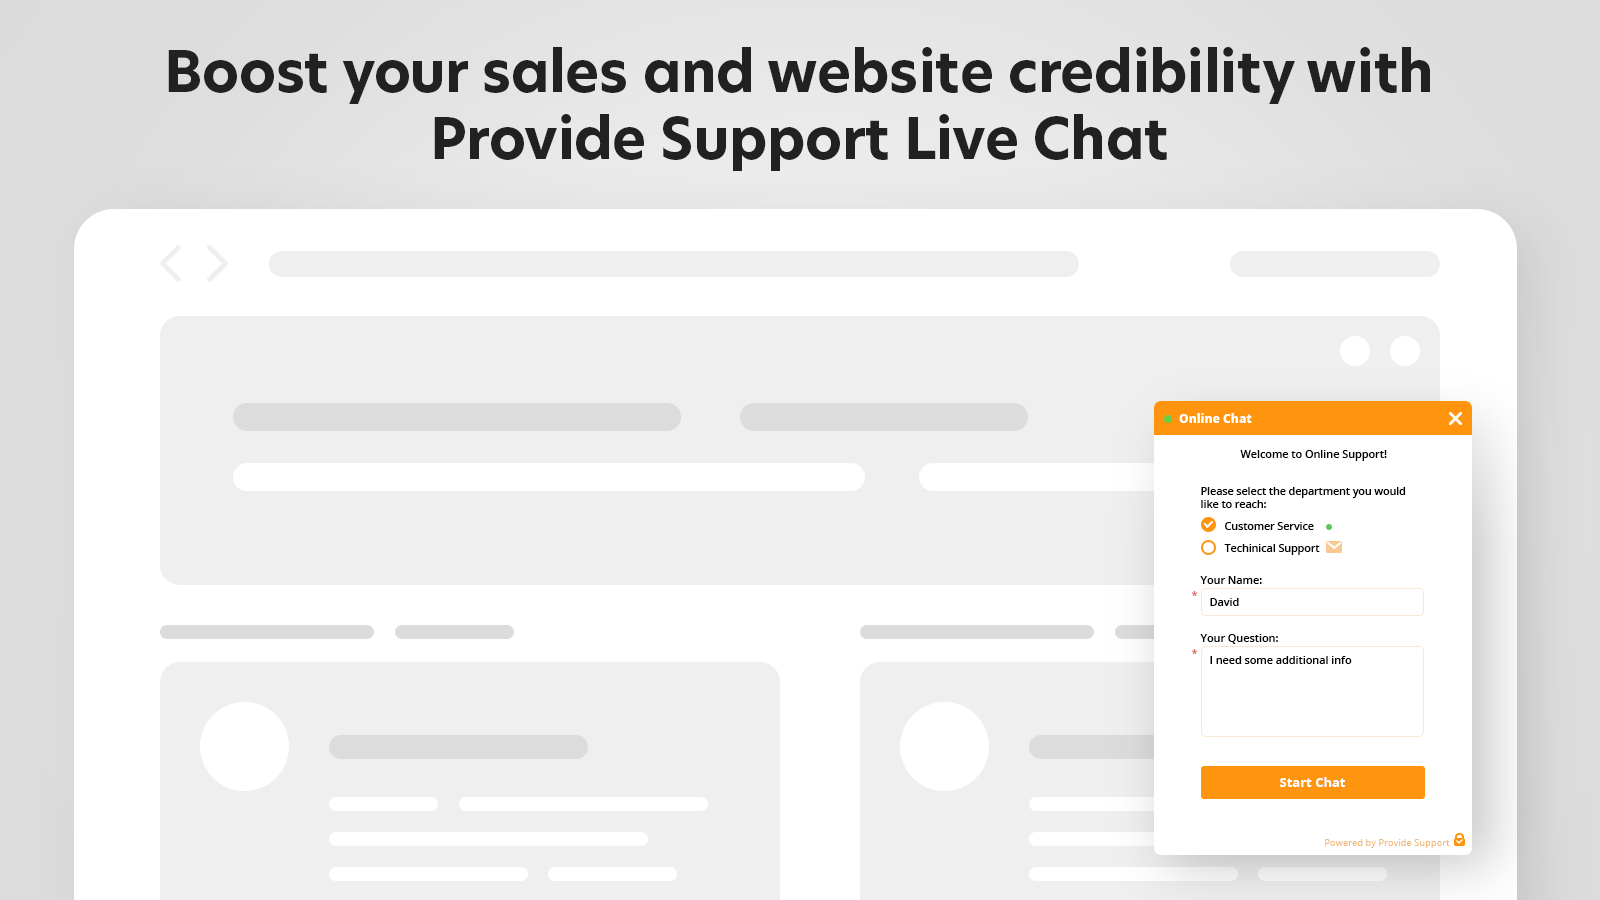 Improve your customer support with Provide Support Live Chat